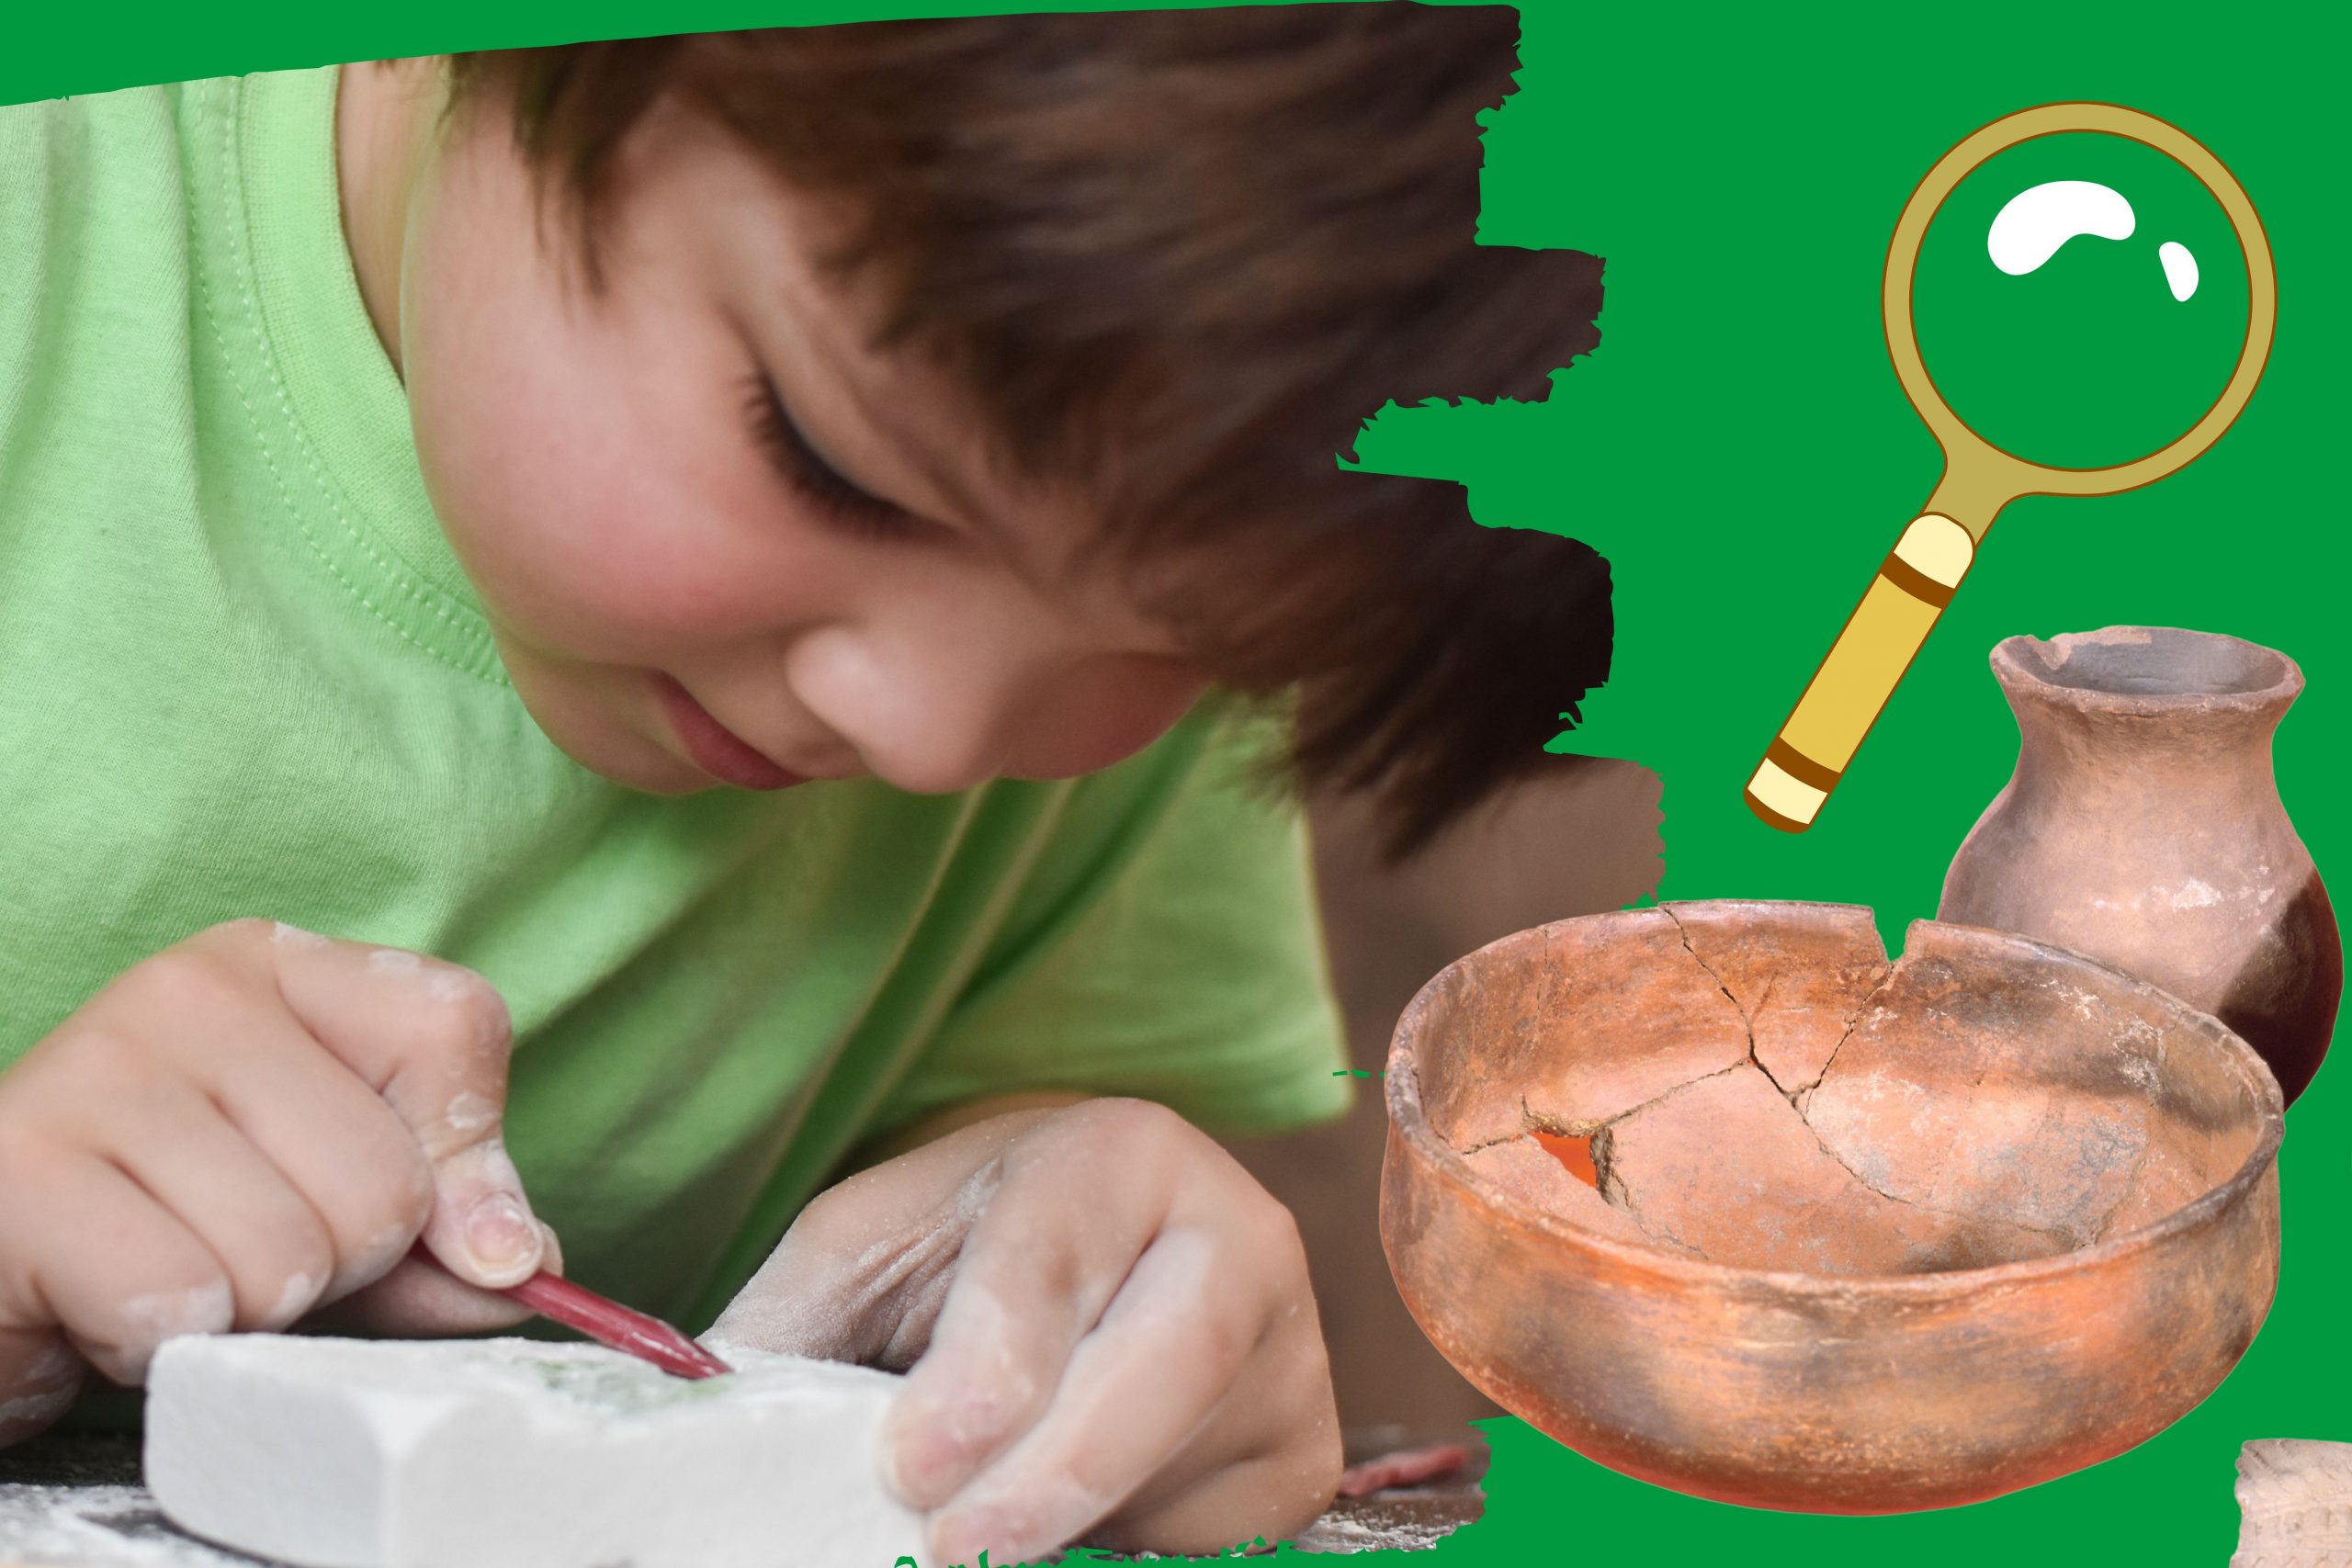 Green background. Close up image of a small boy chipping away at an archaeology block. Old pots and a cartoon magnifying glass in the foreground.